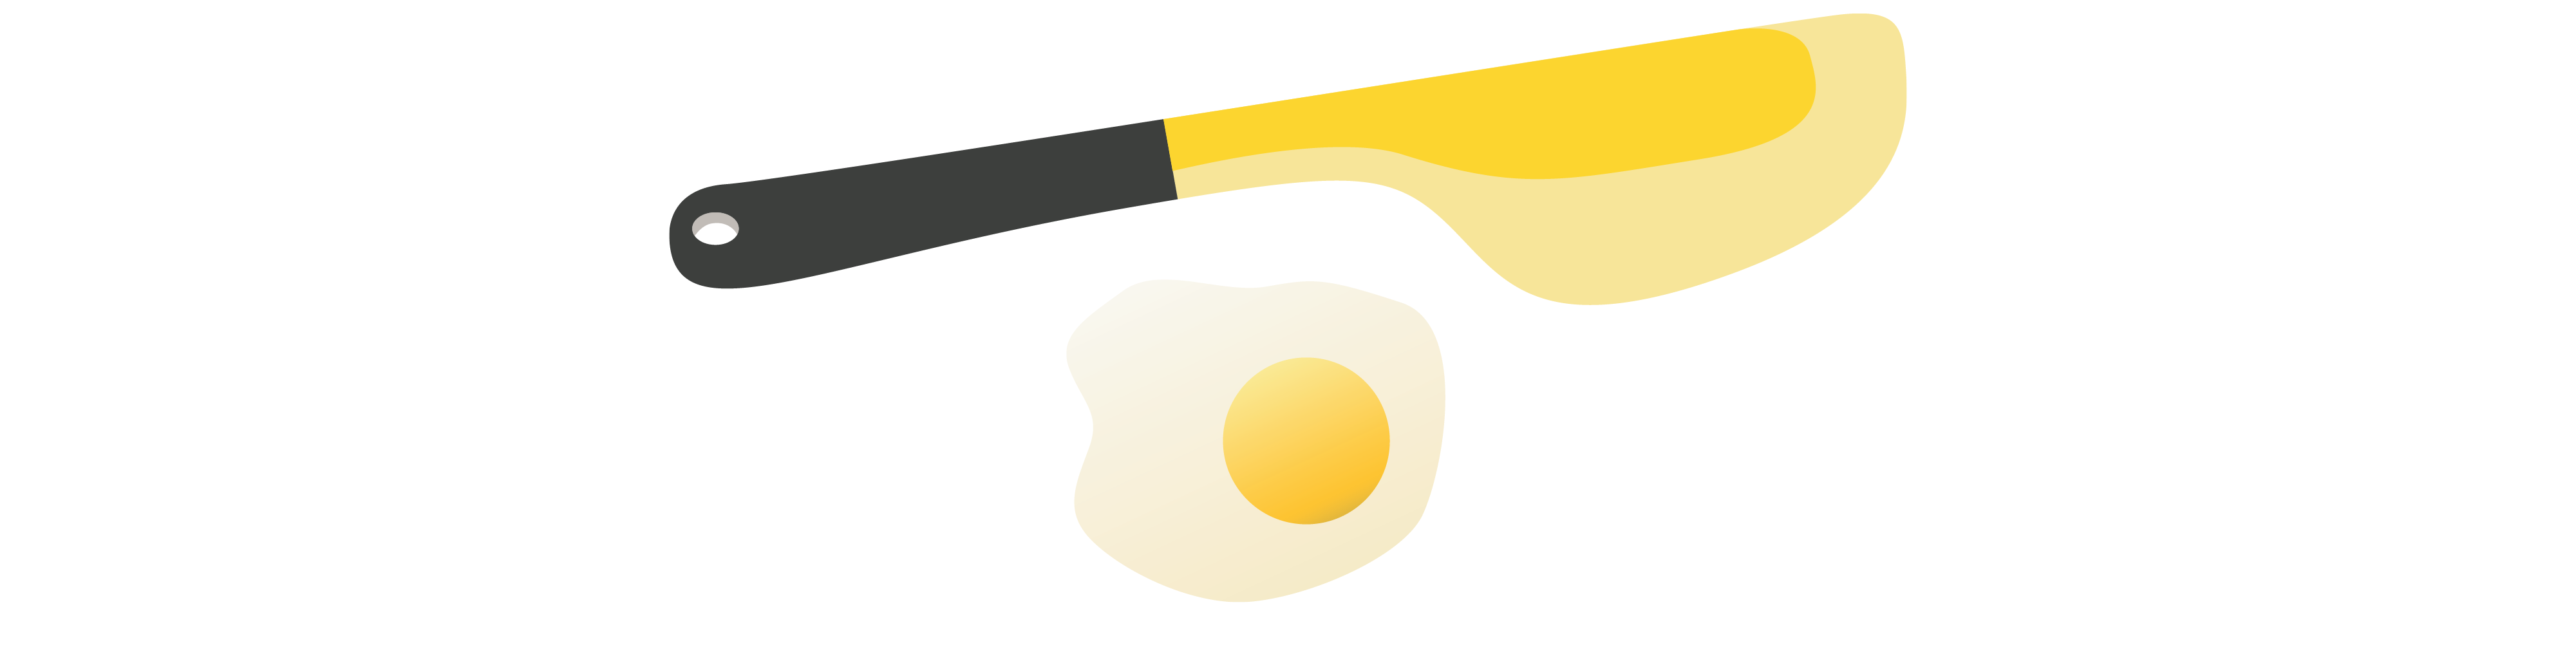 A yellow spatula with a black handle sits beside a cooked, sunny-side-up egg, with the yellow yolk sitting on top of the egg white.